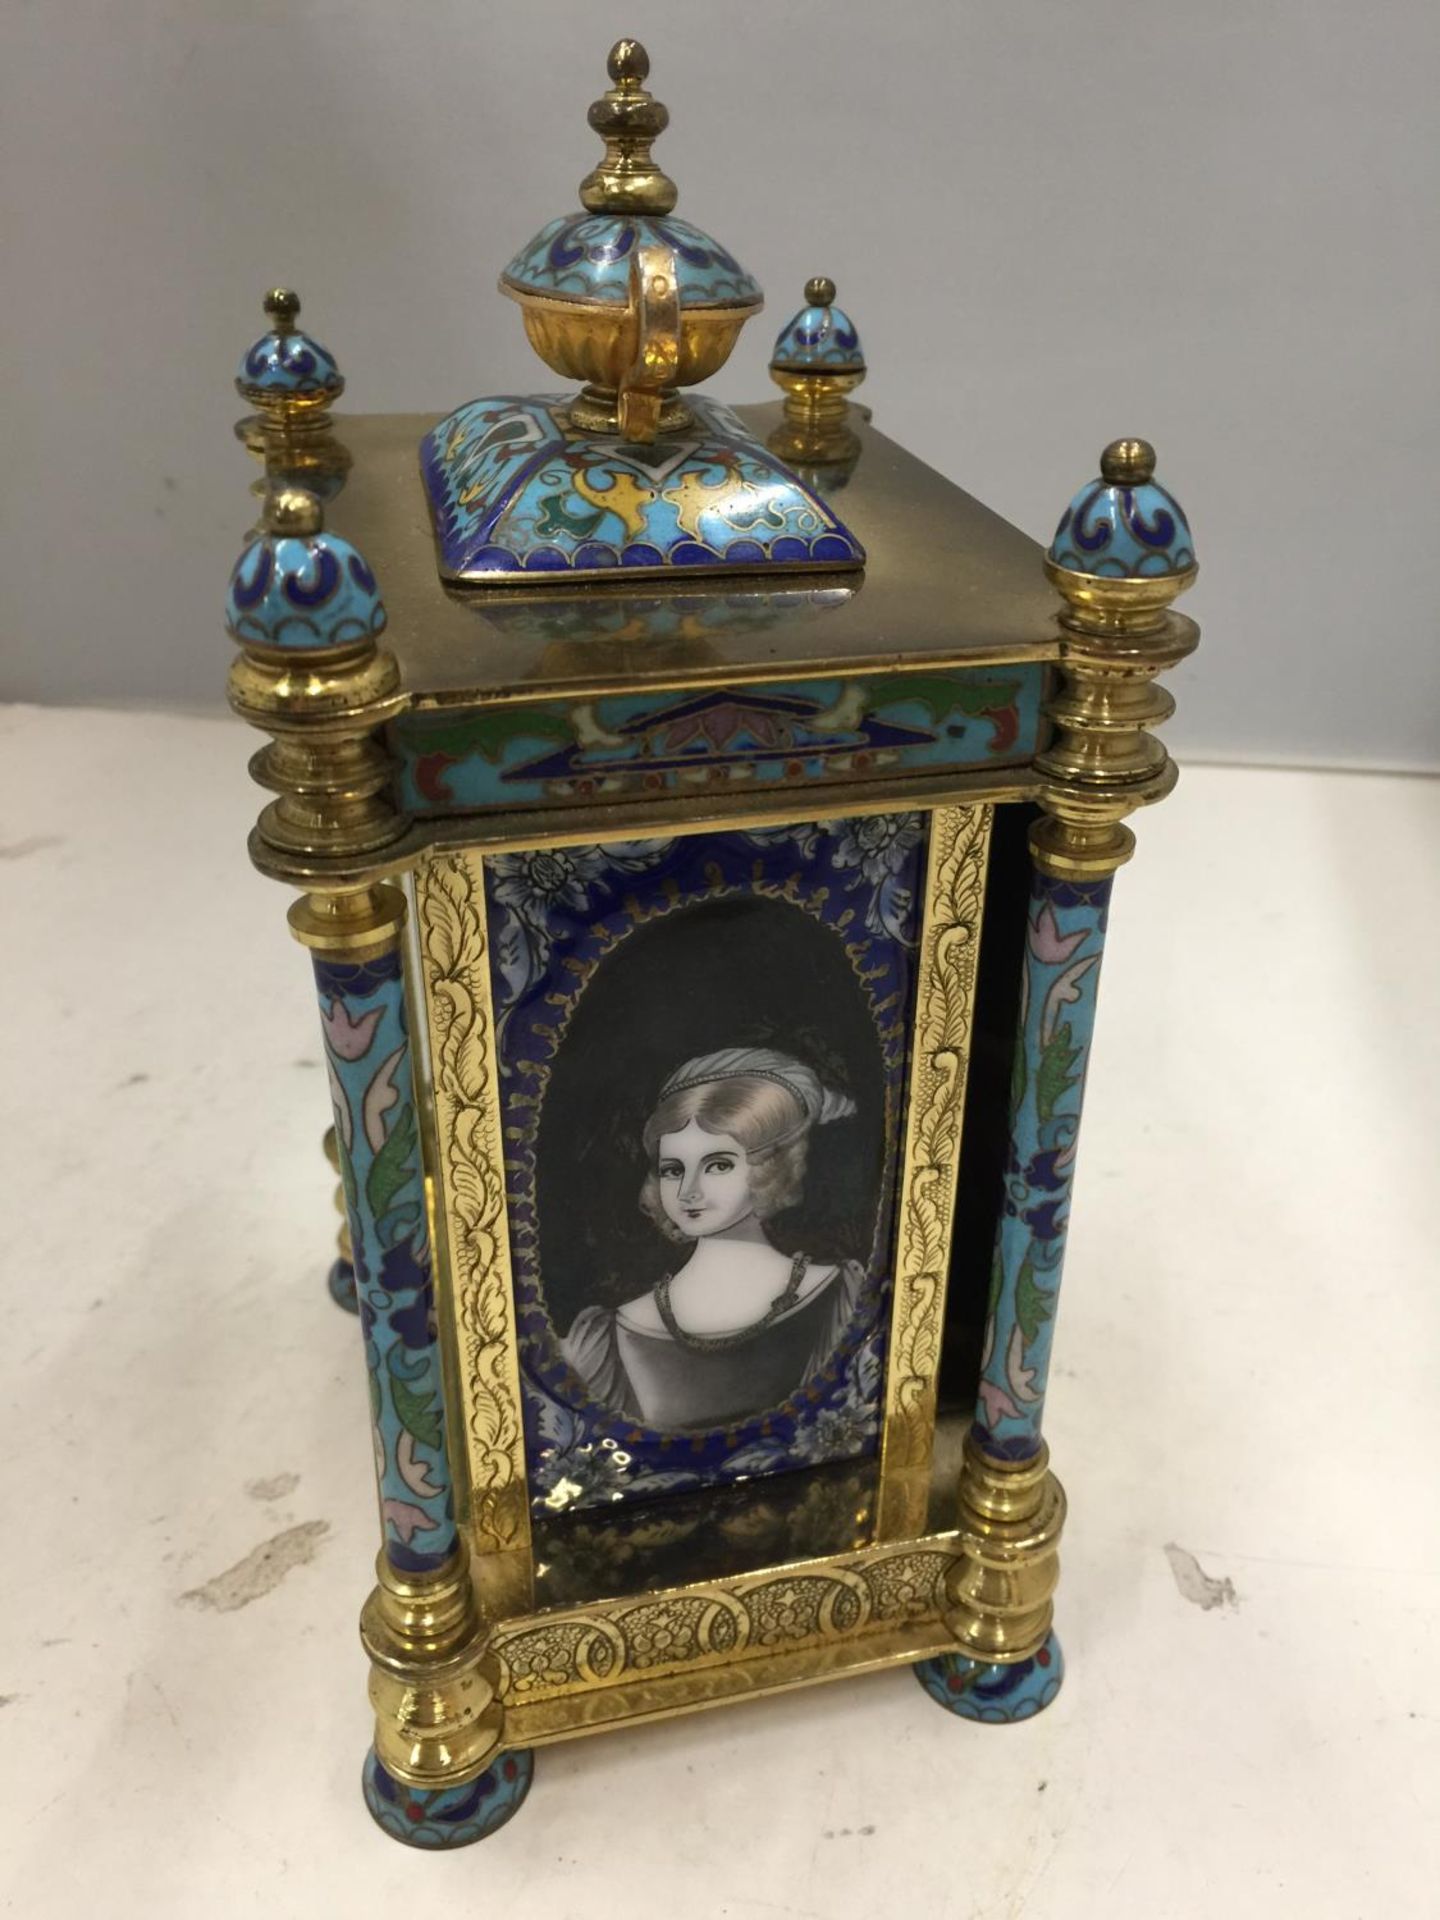 AN ORNATE CLOISONNE CARRIAGE CLOCK 22CM TALL - Image 3 of 7